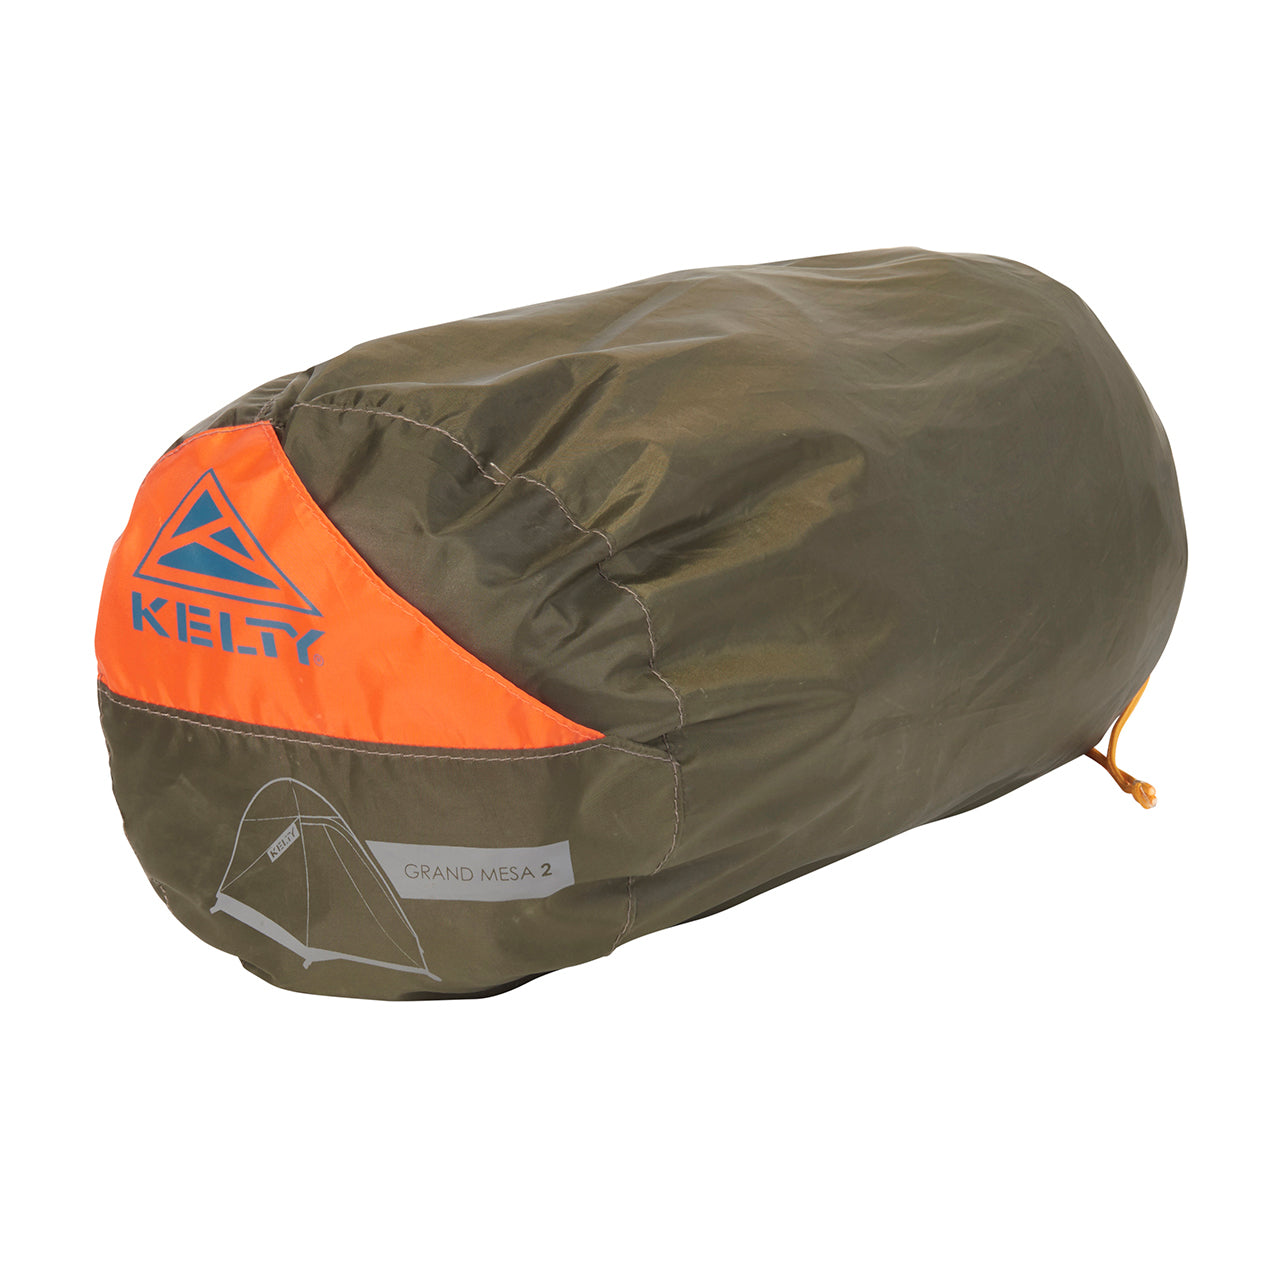 kelty grand mesa 2 person tent in stuff sack